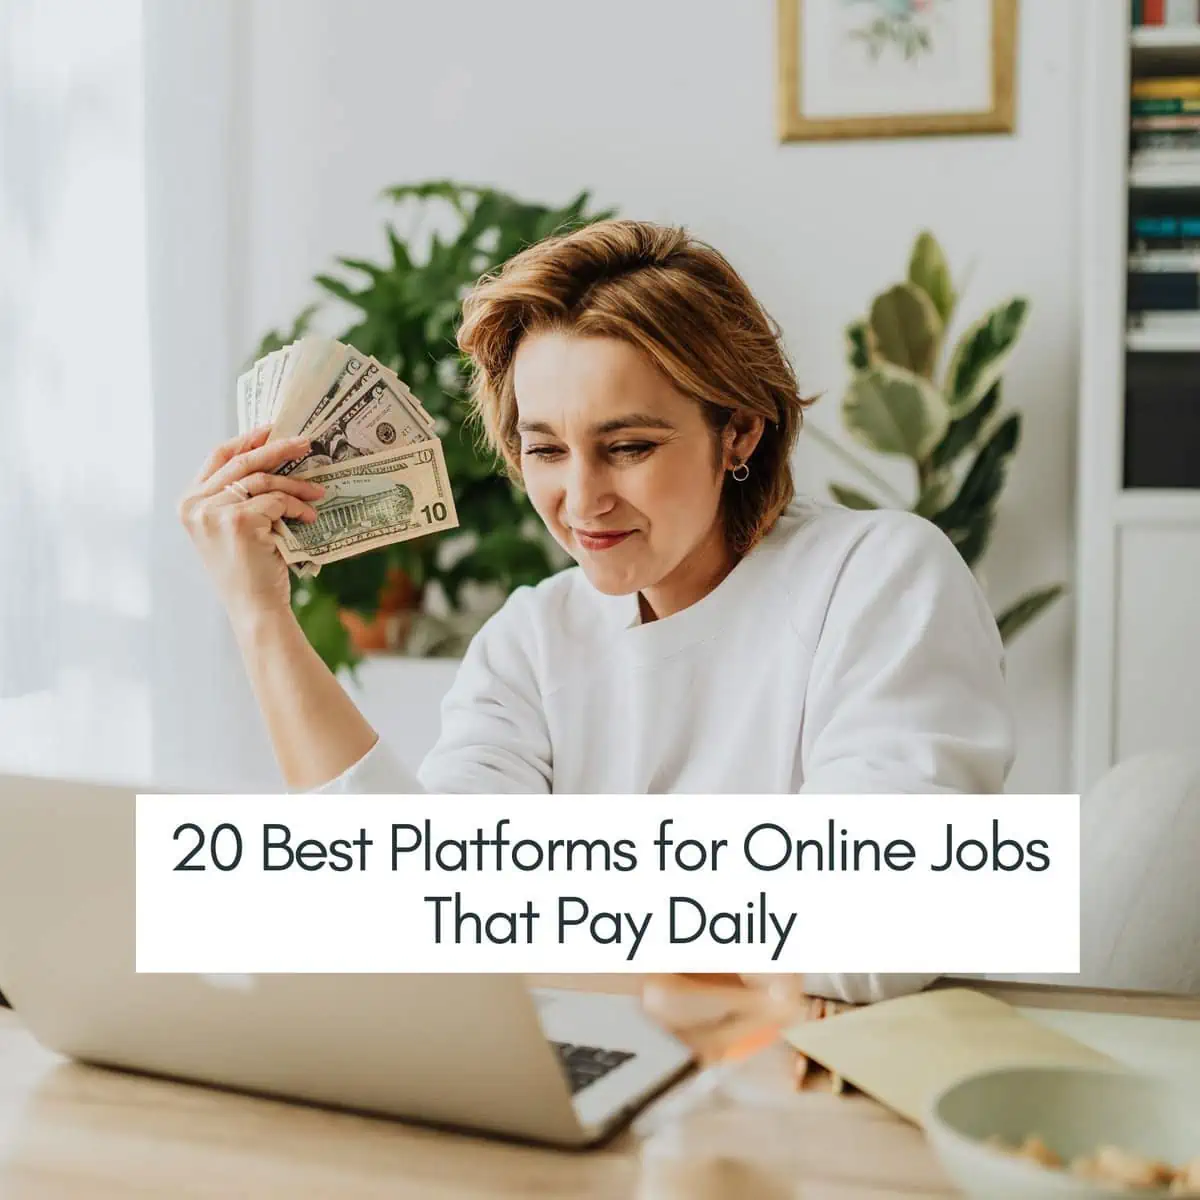 Online Jobs That Pay Daily